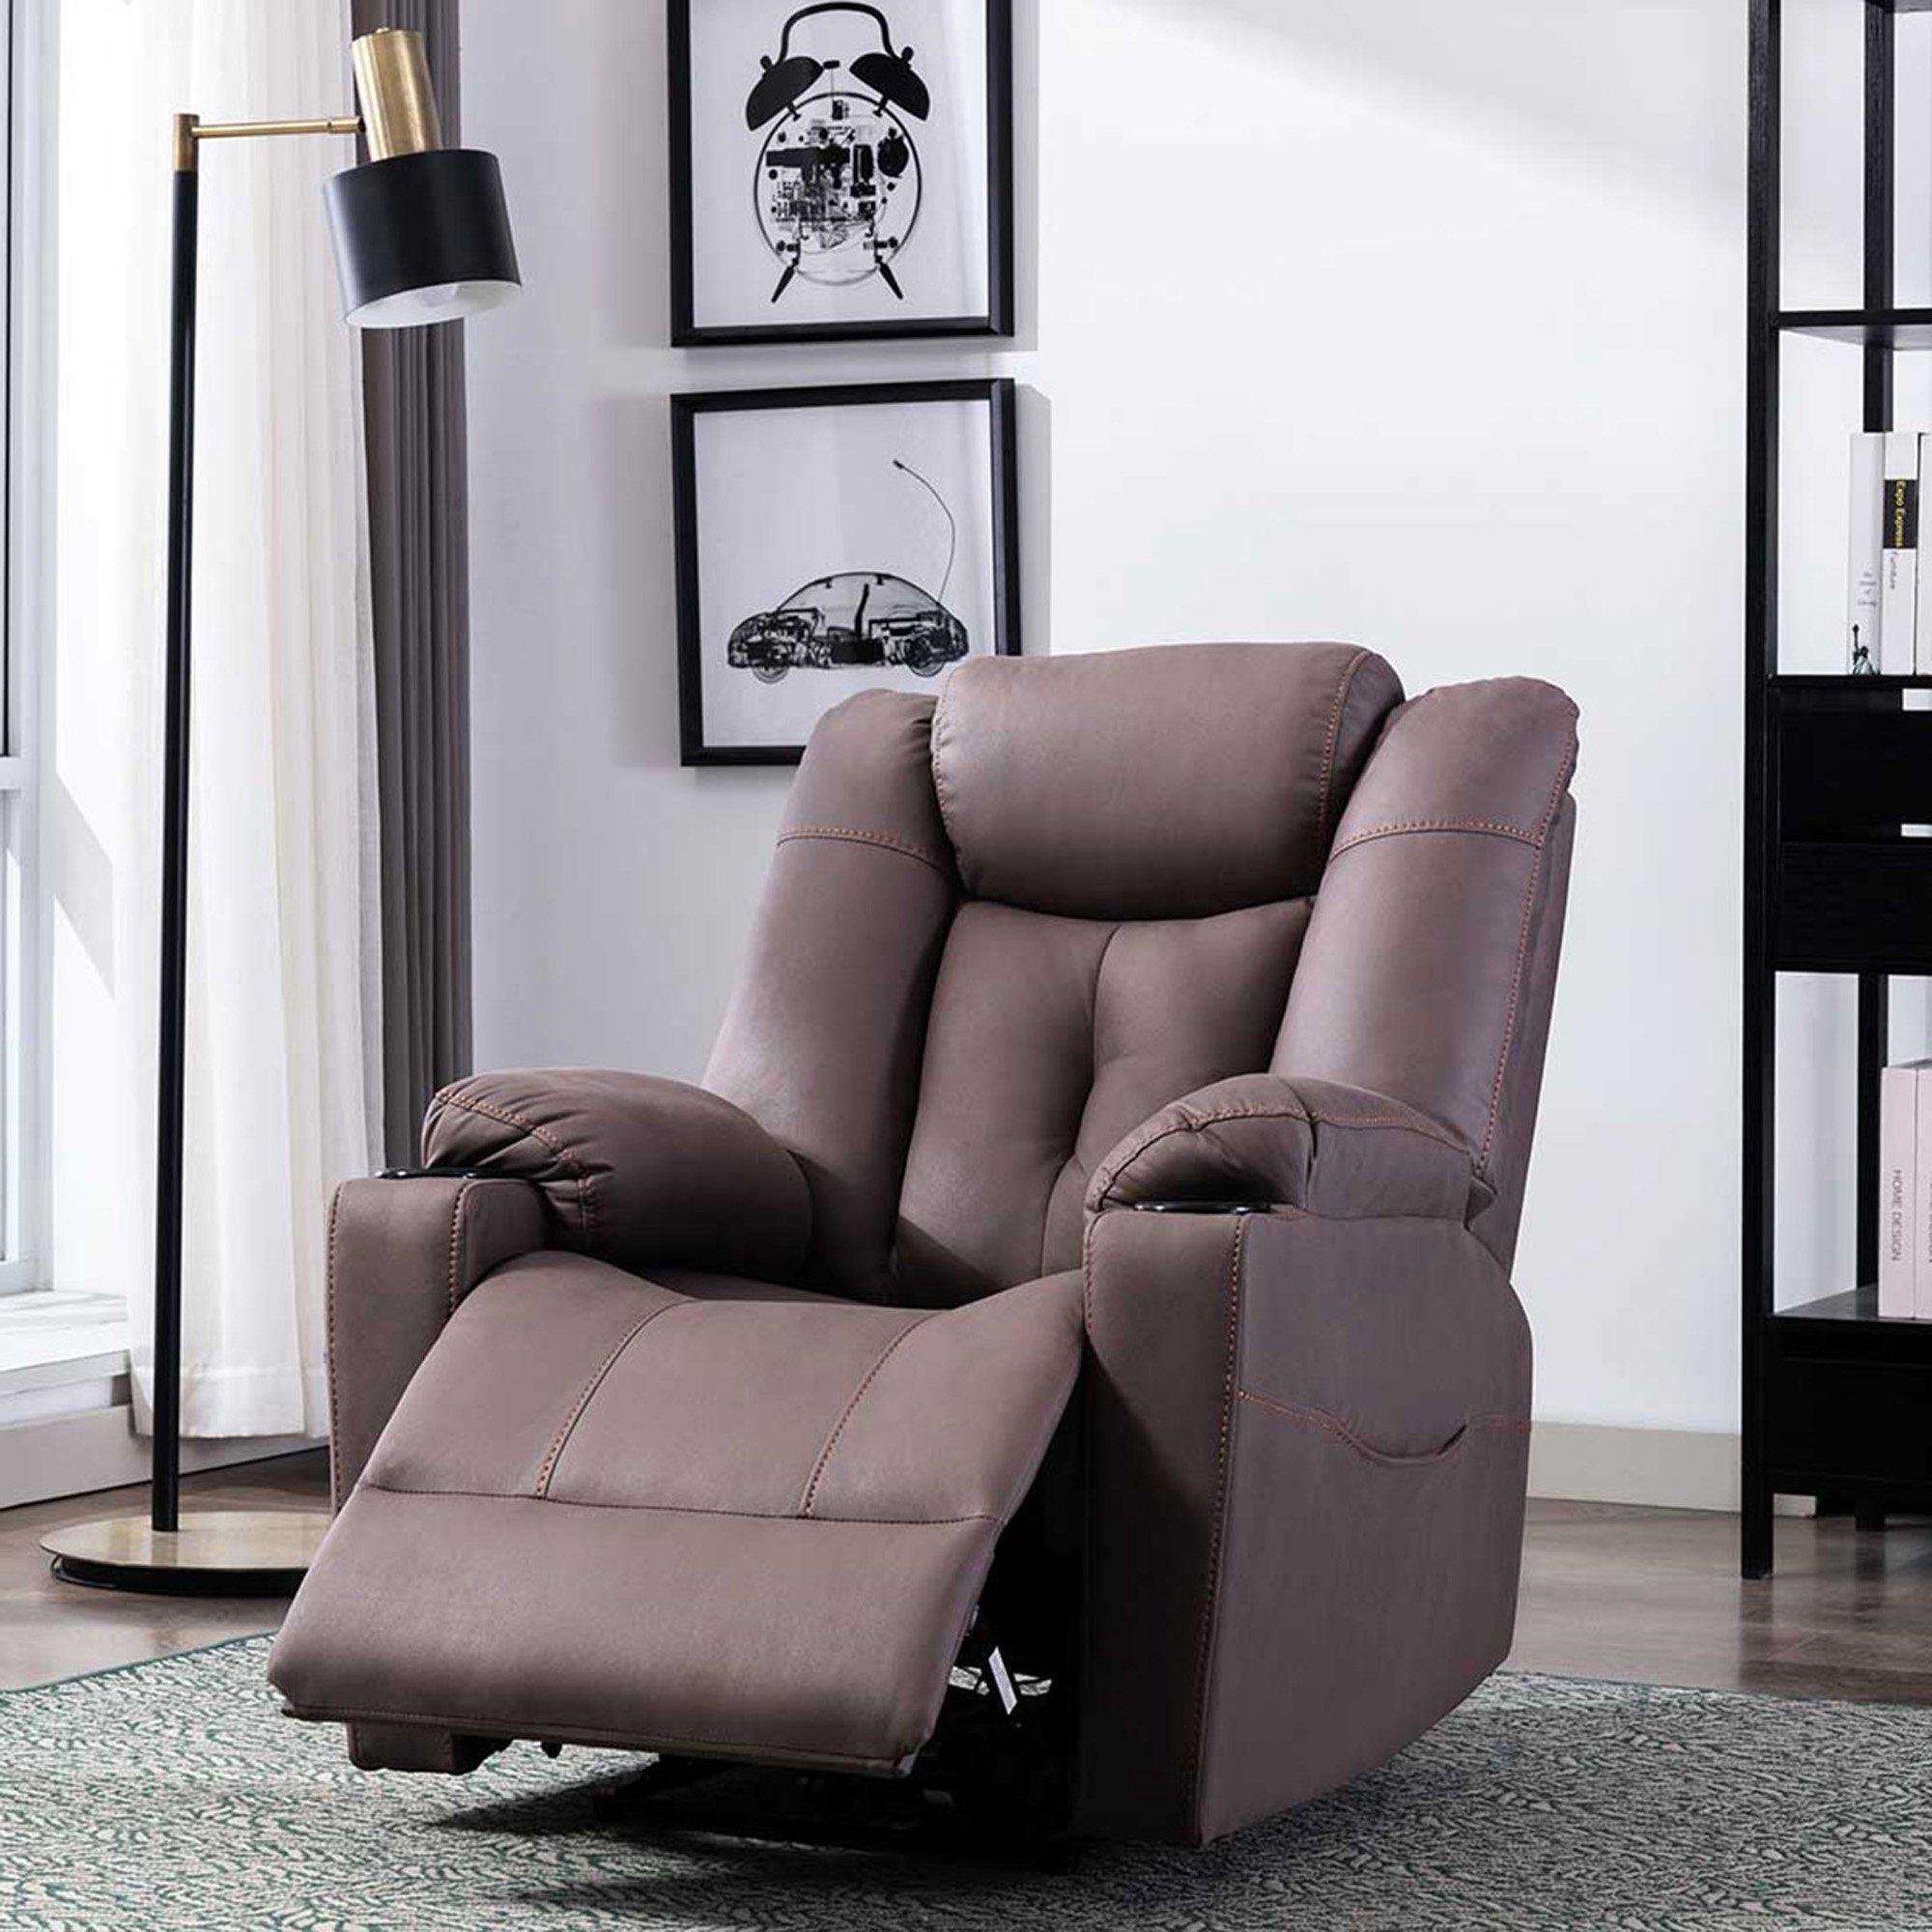 Afton Electric Technology Fabric Auto Recliner USB Lounge Sofa Chair